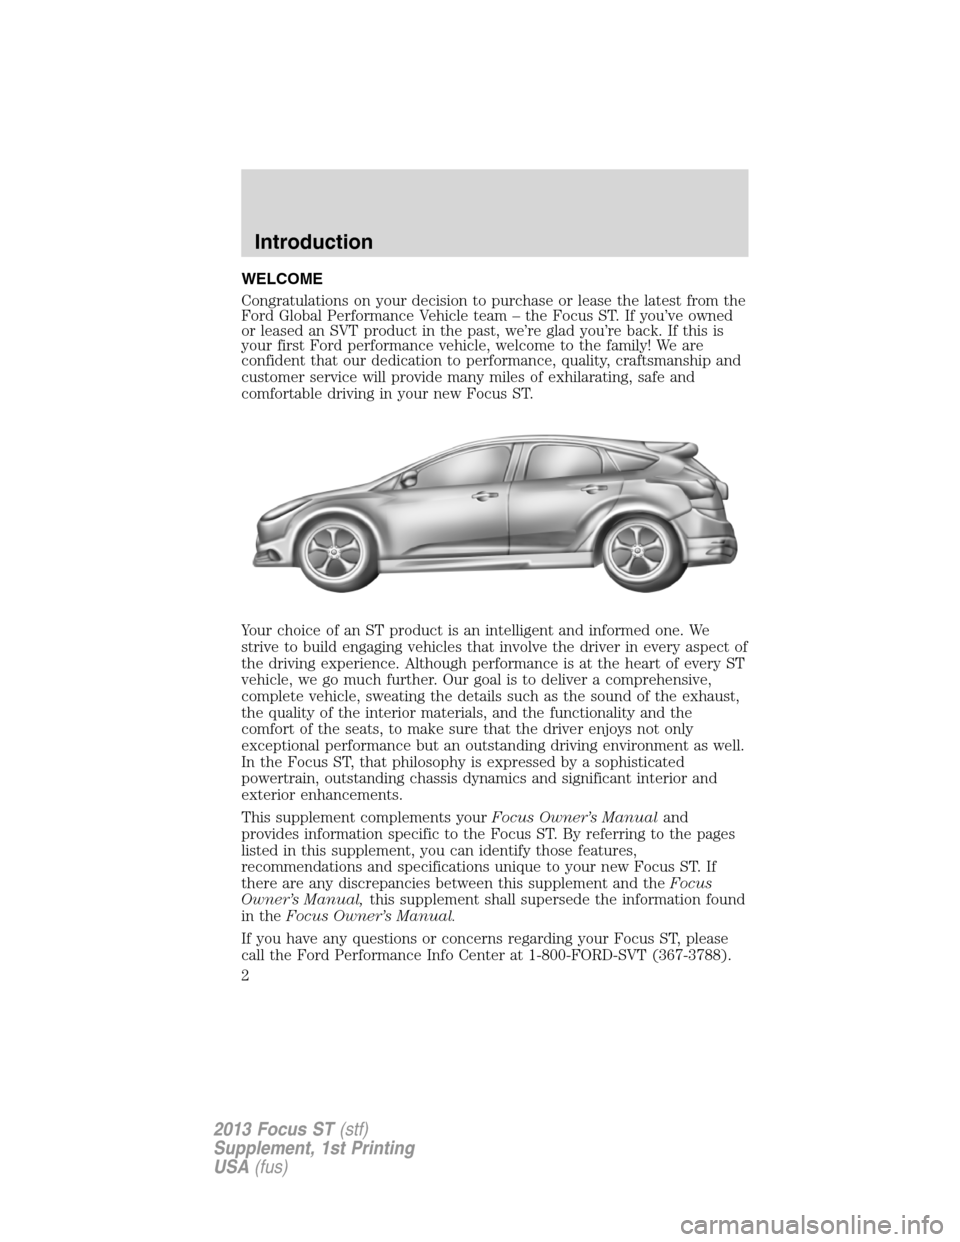 FORD FOCUS 2013 3.G ST Supplement Manual WELCOME
Congratulations on your decision to purchase or lease the latest from the
Ford Global Performance Vehicle team – the Focus ST. If you’ve owned
or leased an SVT product in the past, we’re